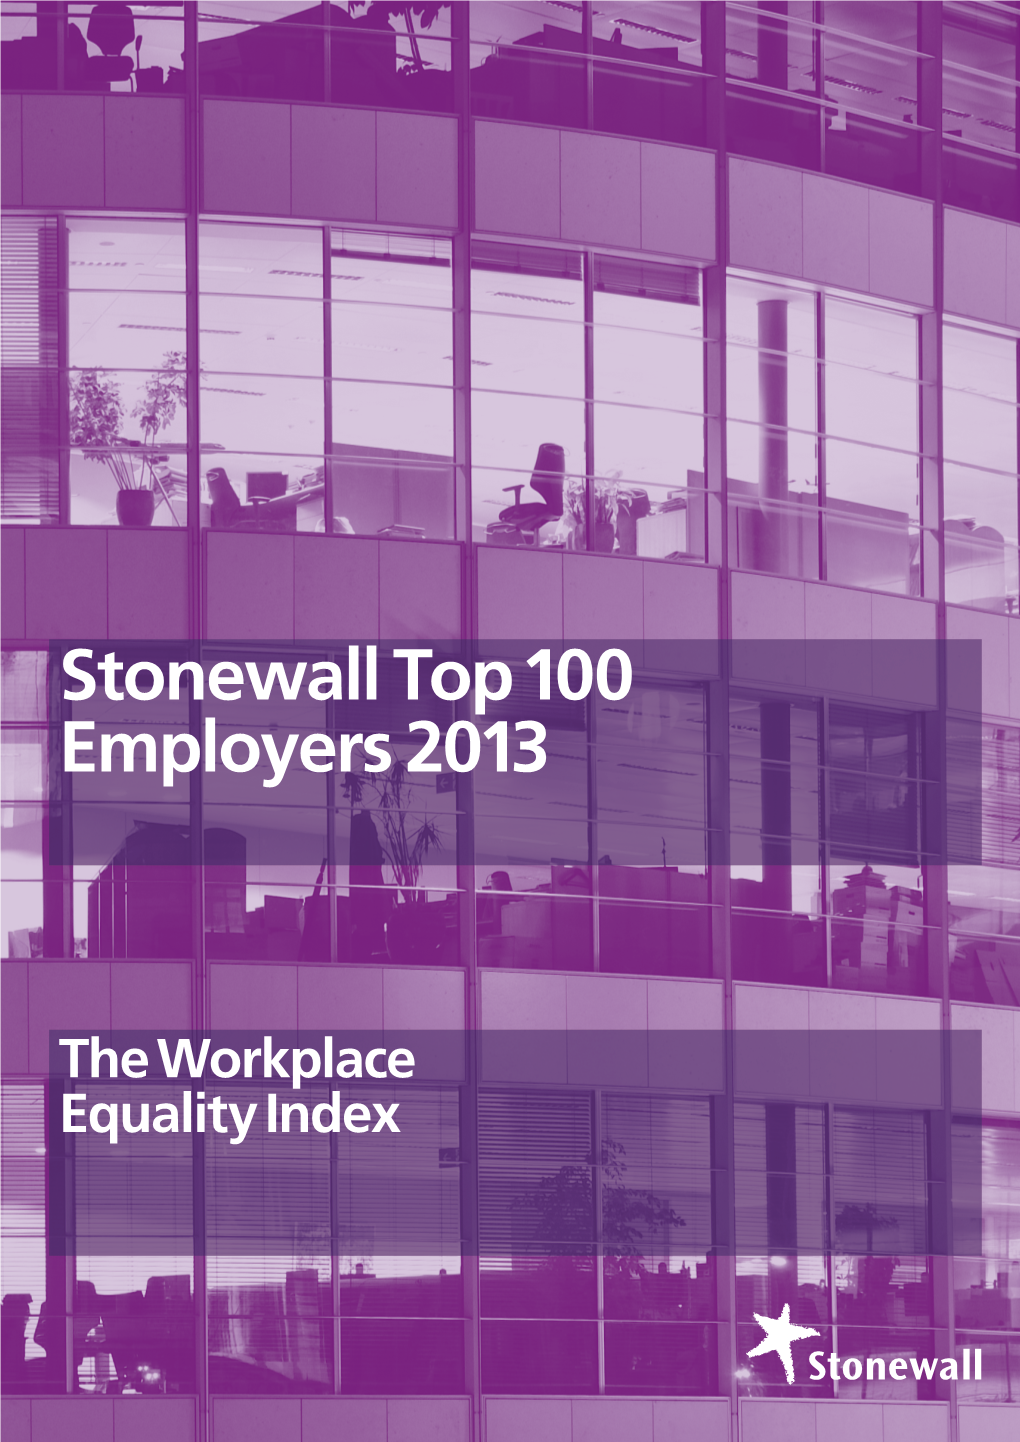 Stonewall Top 100 Employers 2013